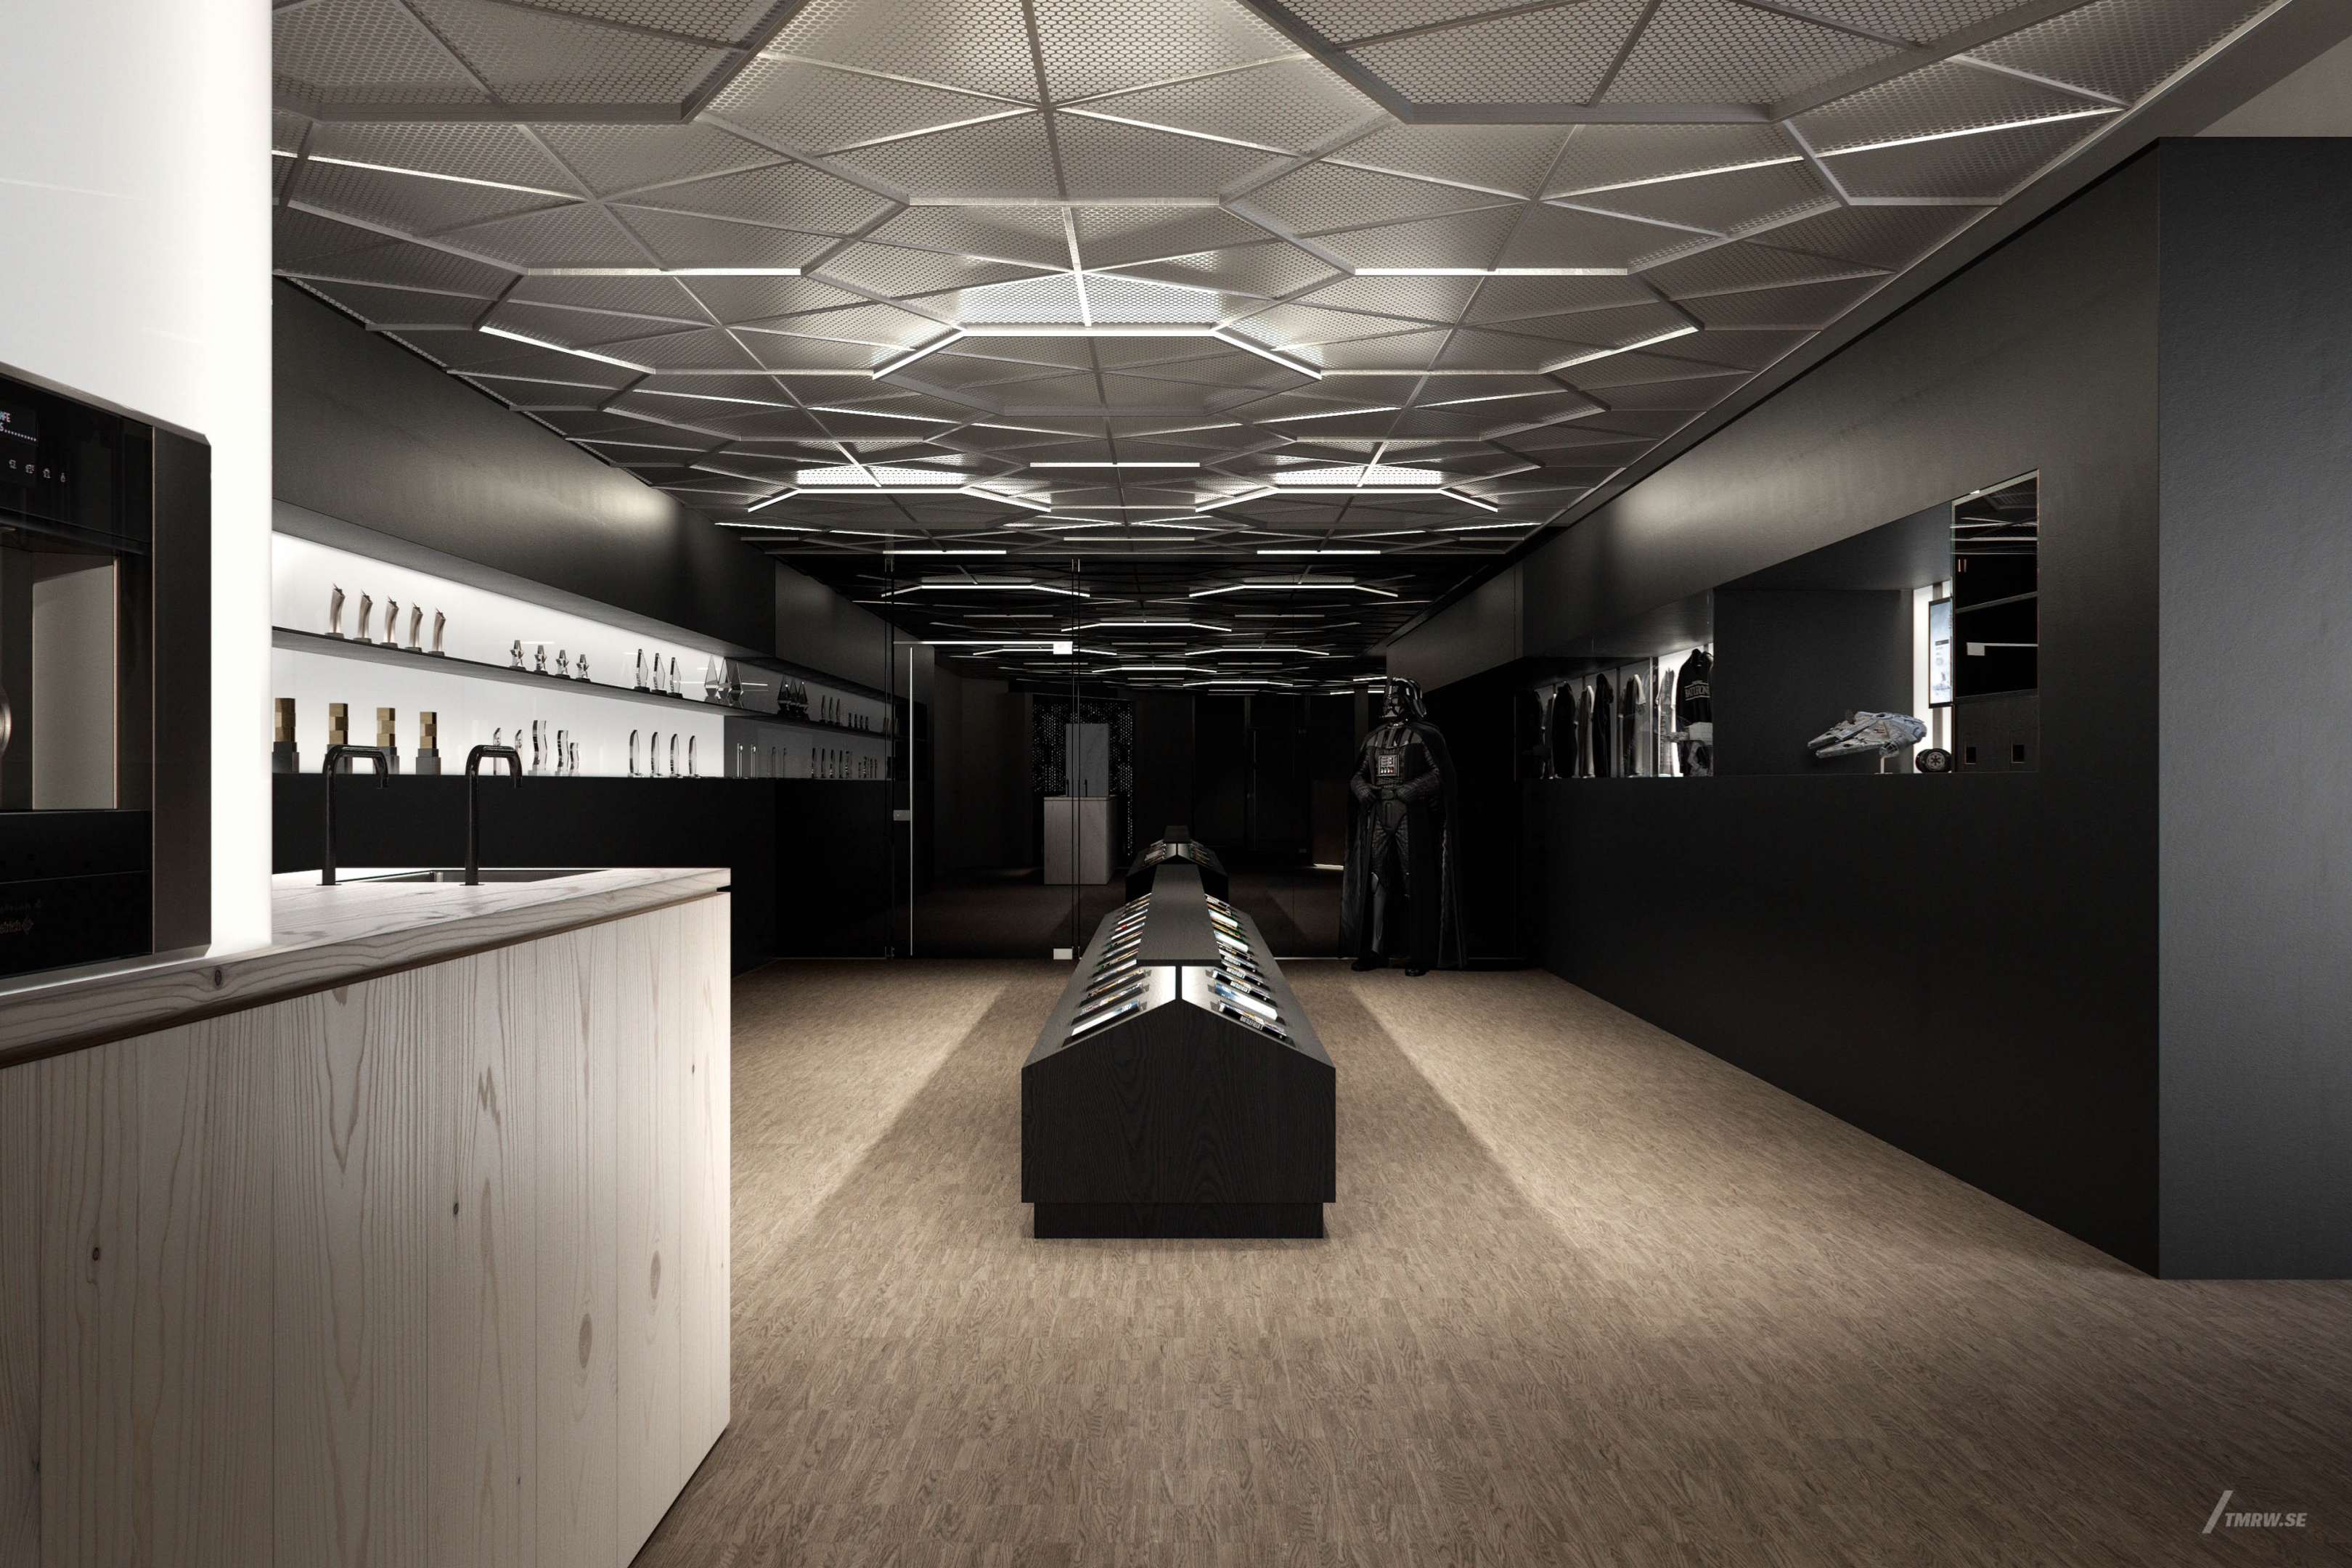 Architectural visualization of Dice for Studio Stockhom, a lobby room in dim light from an eye level view.